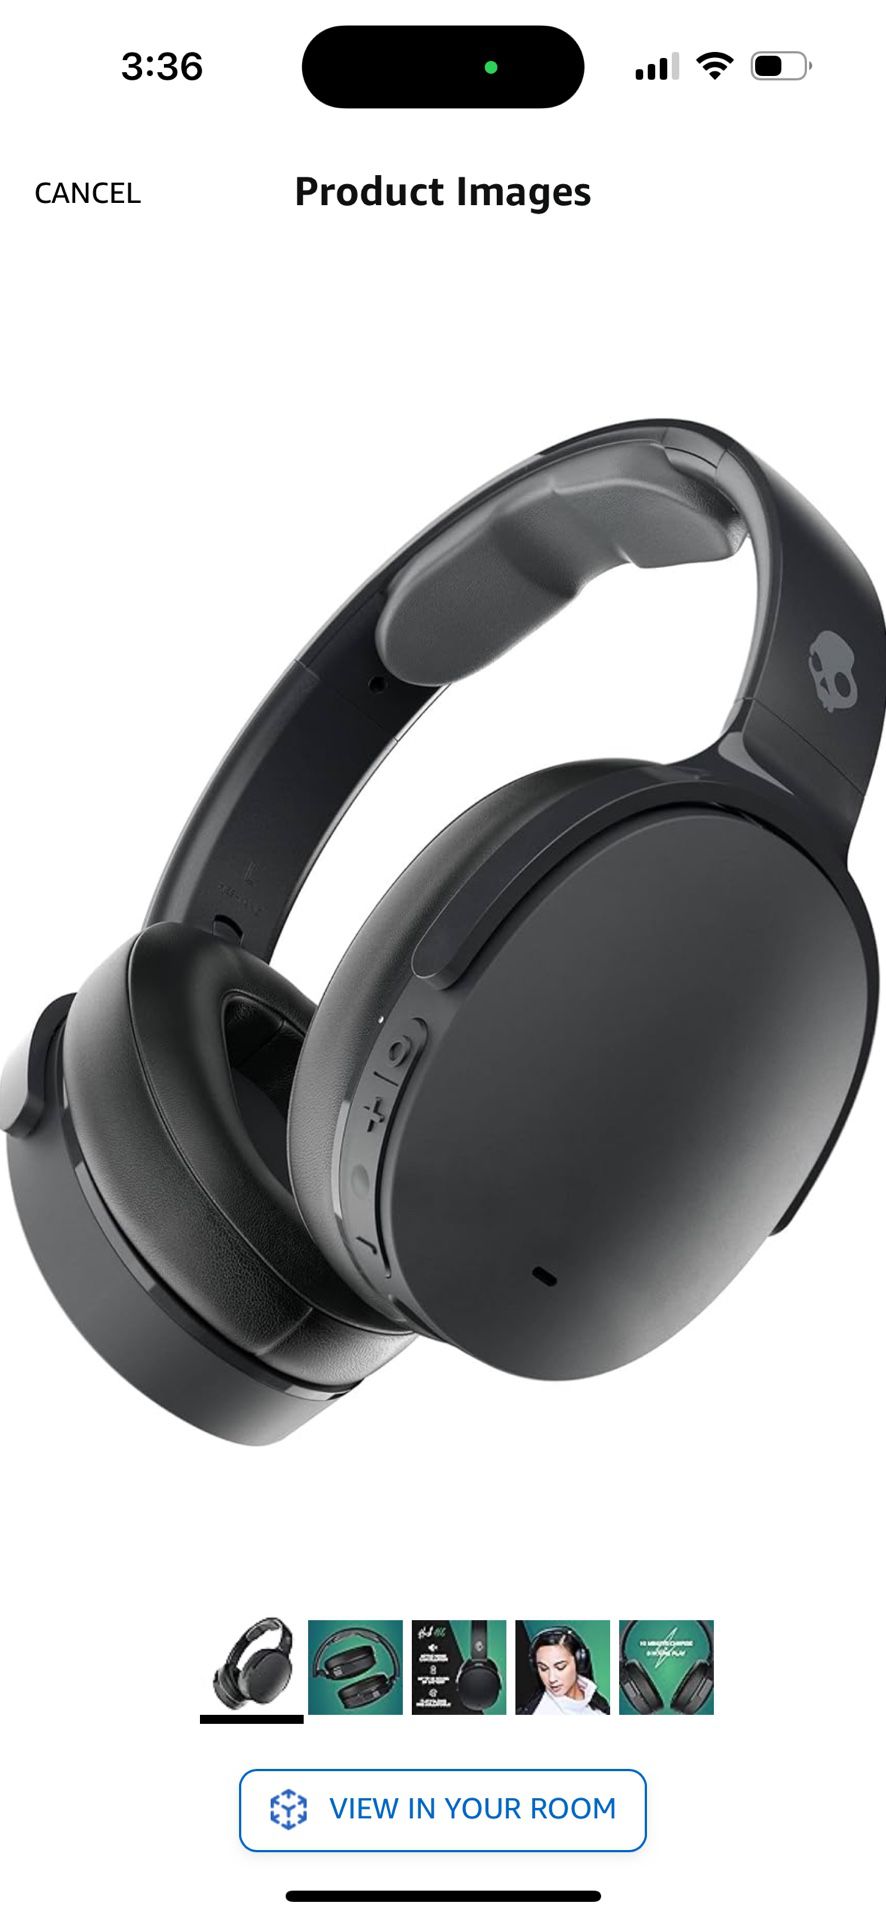 Skullcandy Hesh ANC Over-Ear Noise Cancelling Wireless Headphones, 22 Hr Battery, Microphone, Works with iPhone Android and Bluetooth Devices - True B